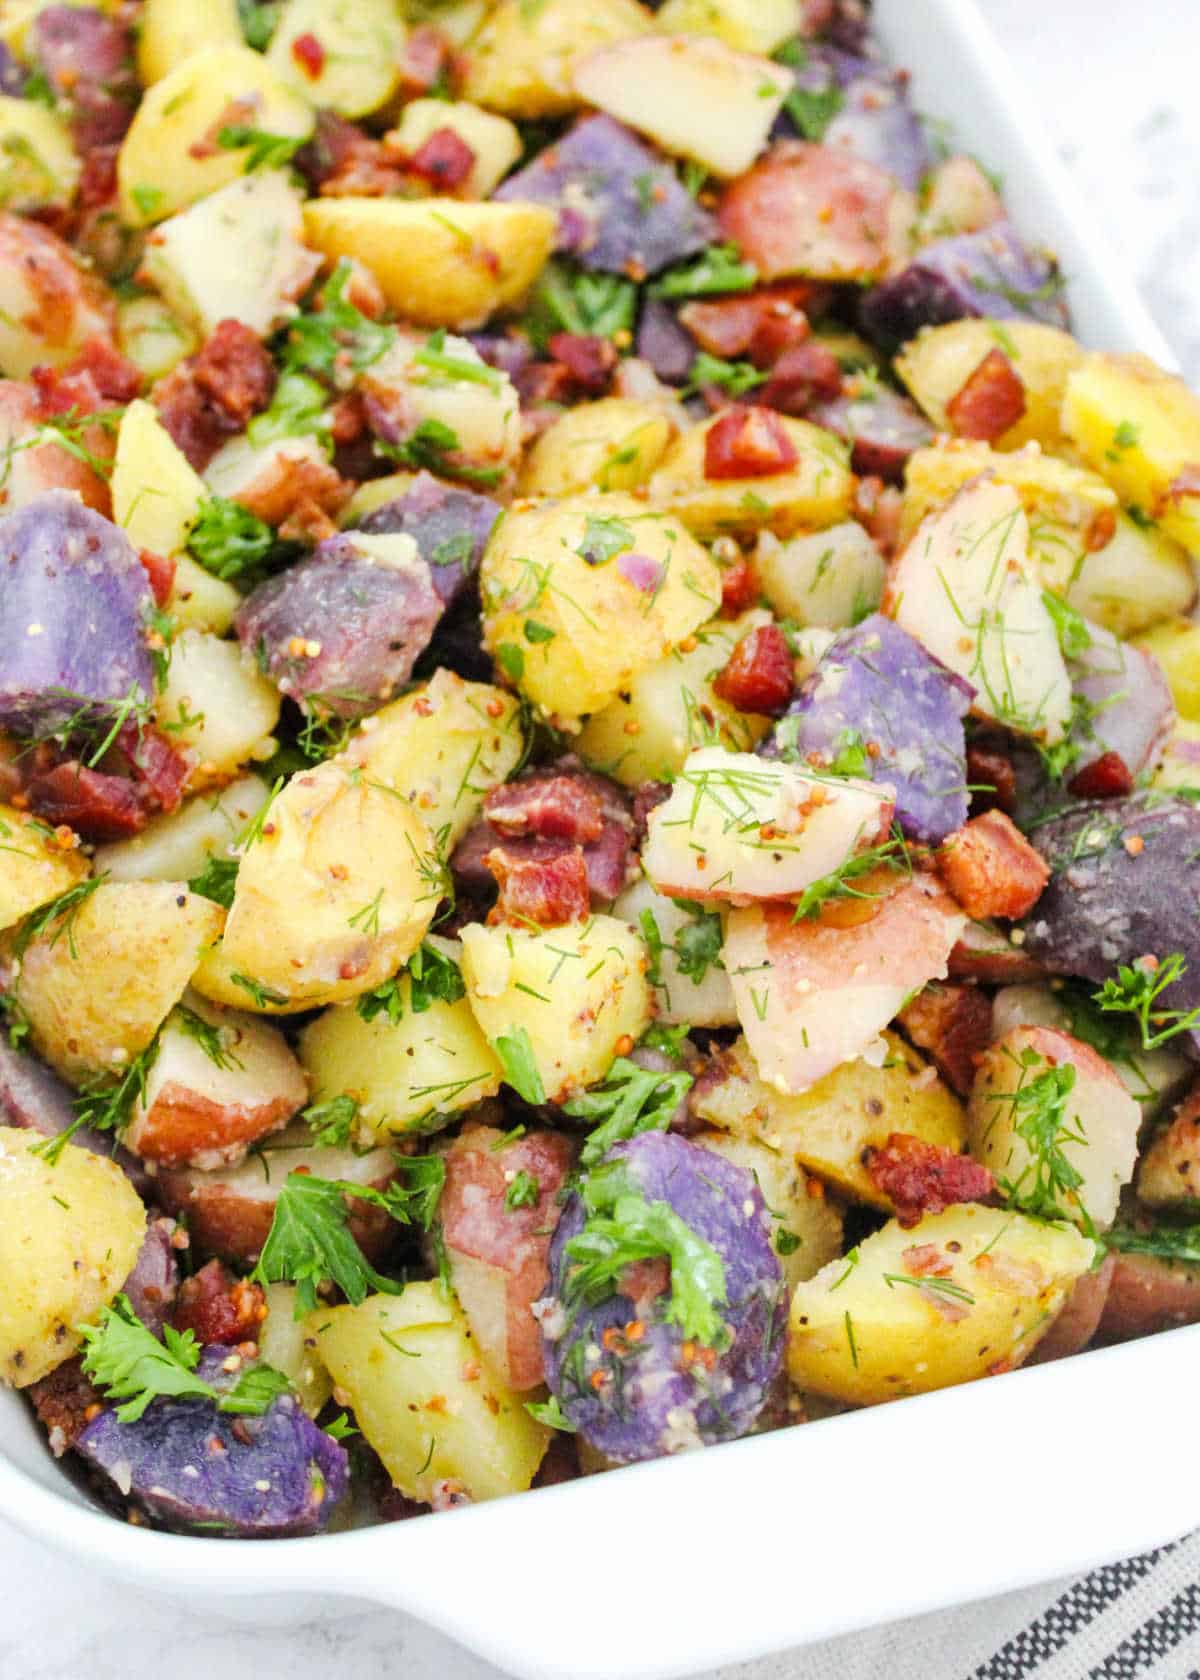 Close up of no mayo potato salad with bacon bits, herbs and different colored potatoes.